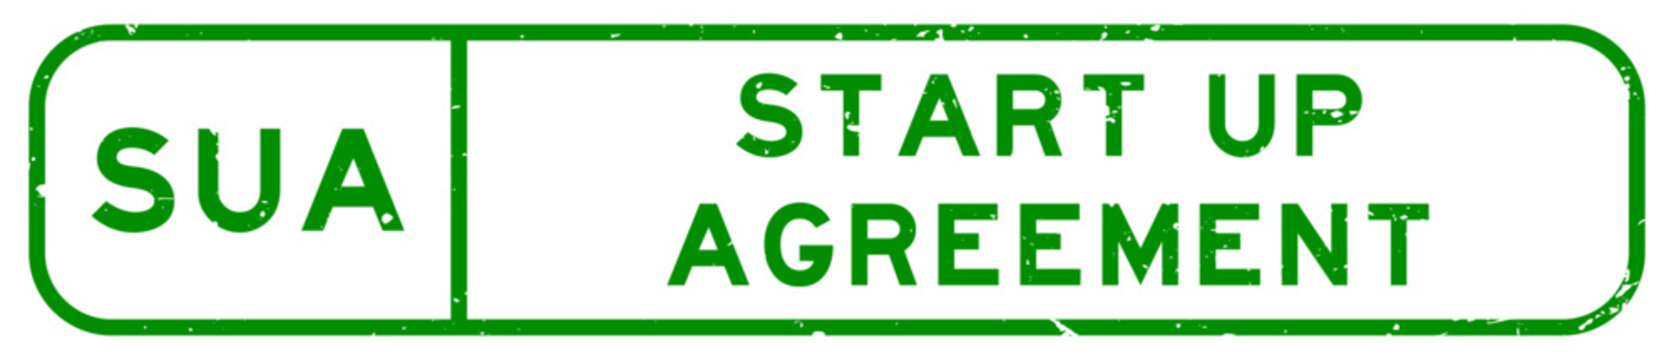 Grunge green SUA Start up agreement word square rubber seal stamp on white background